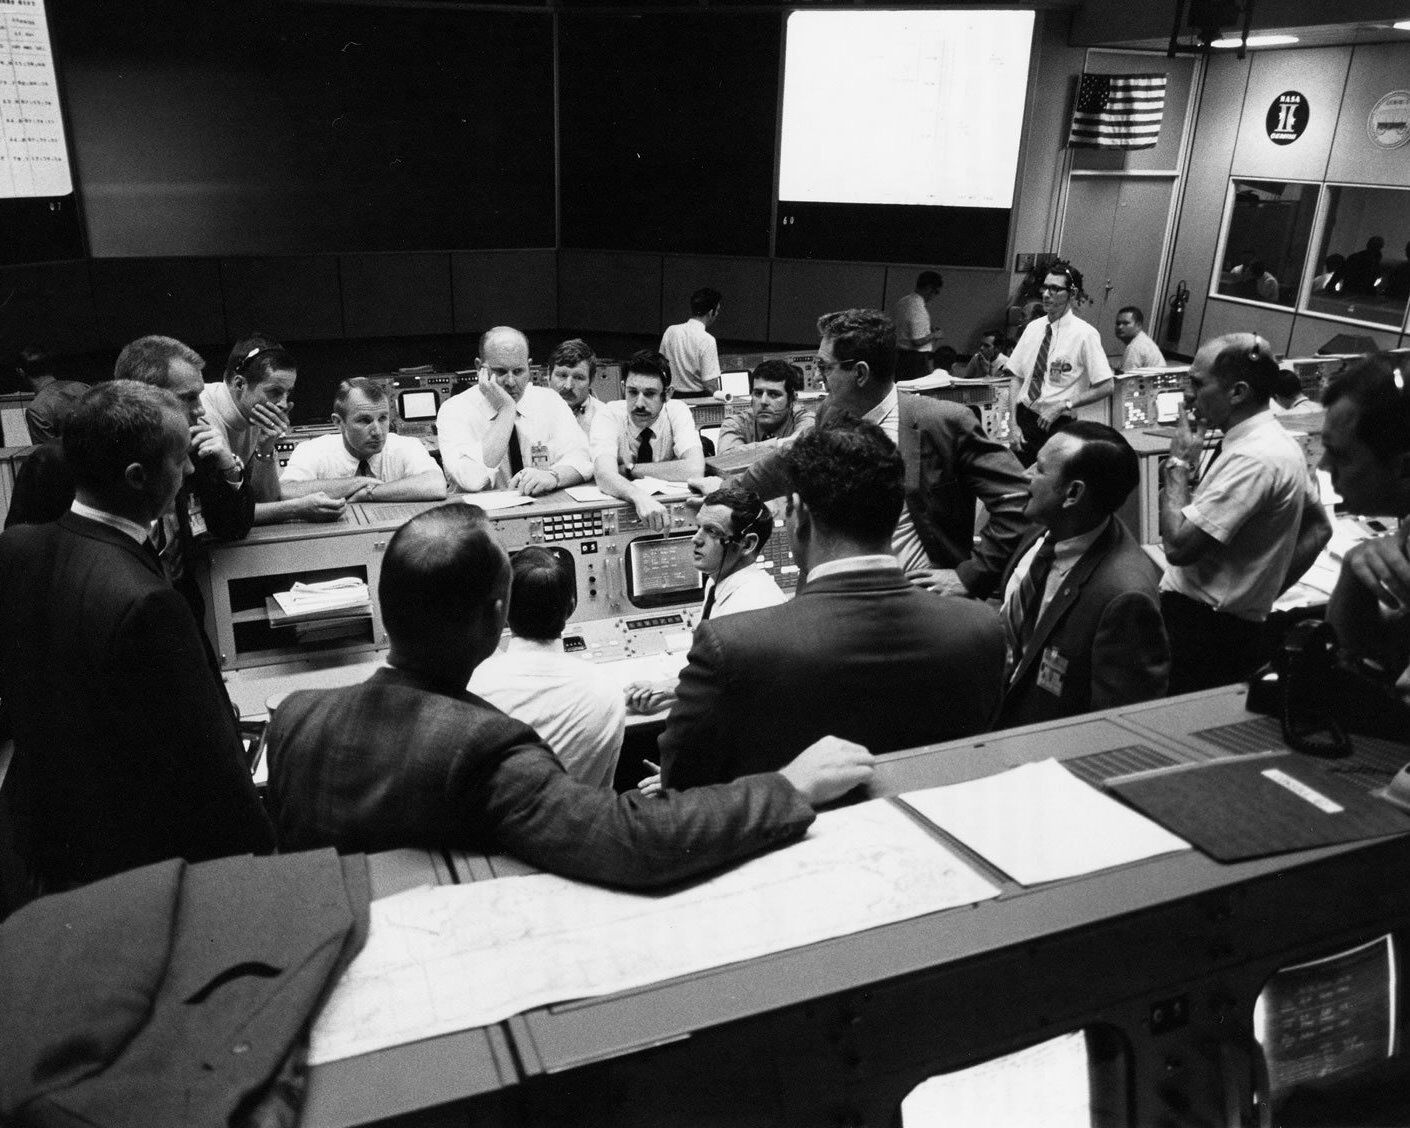 MISSION CONTROL IN FINAL HOURS OF THE APOLLO 13 MISSION - 8X10 PHOTO (AA-824)